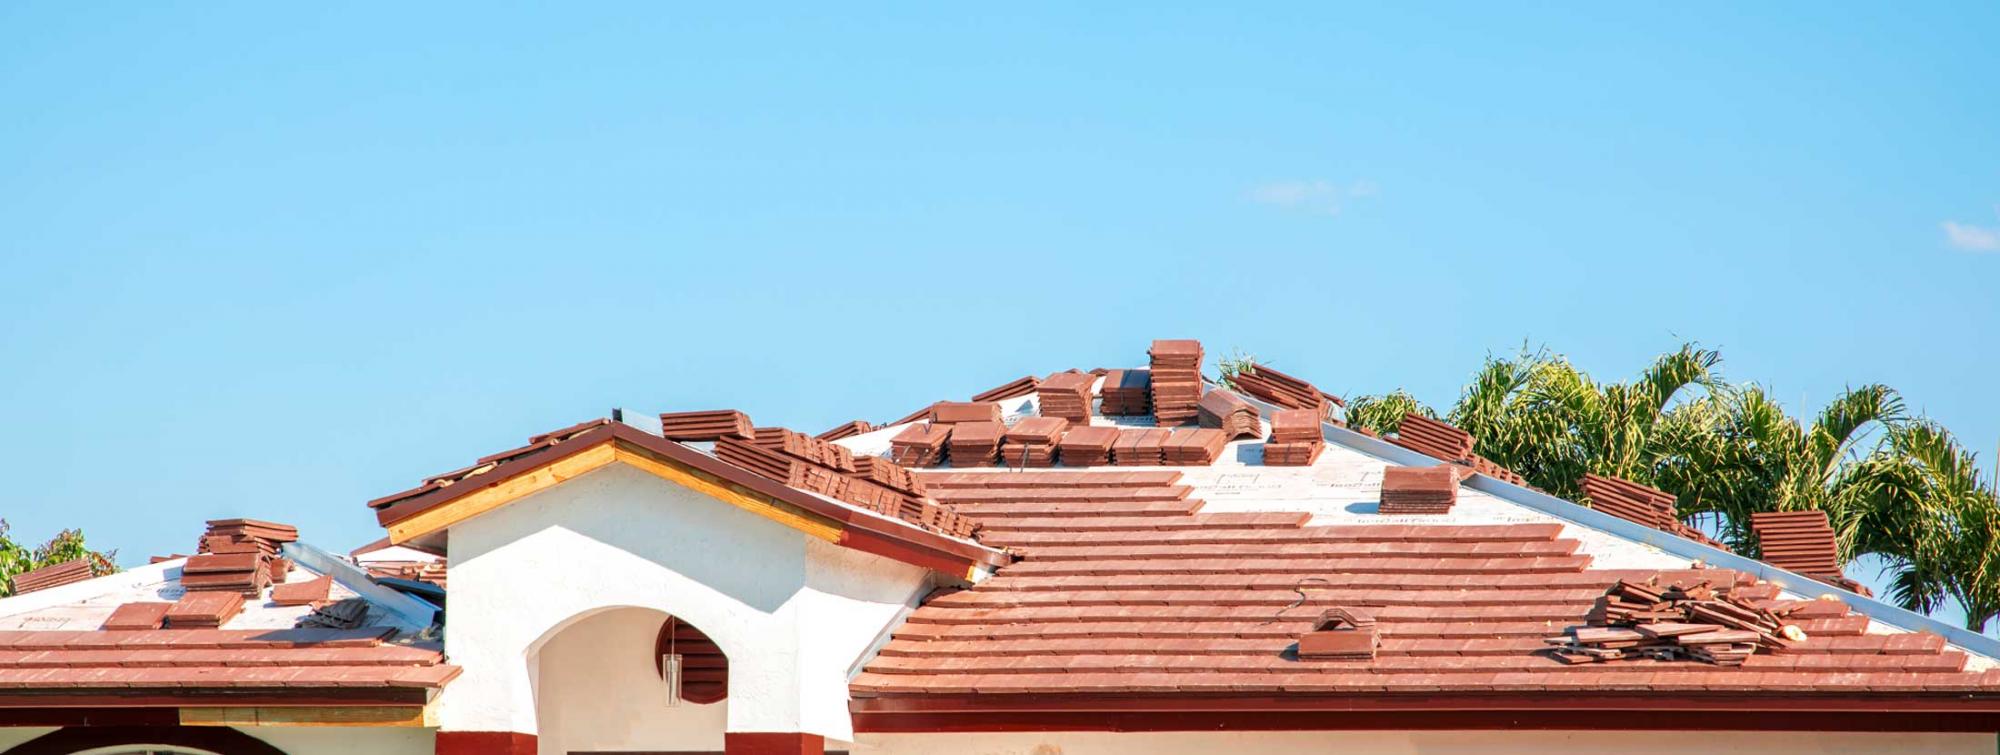 Picture of a tile roof in Arizona